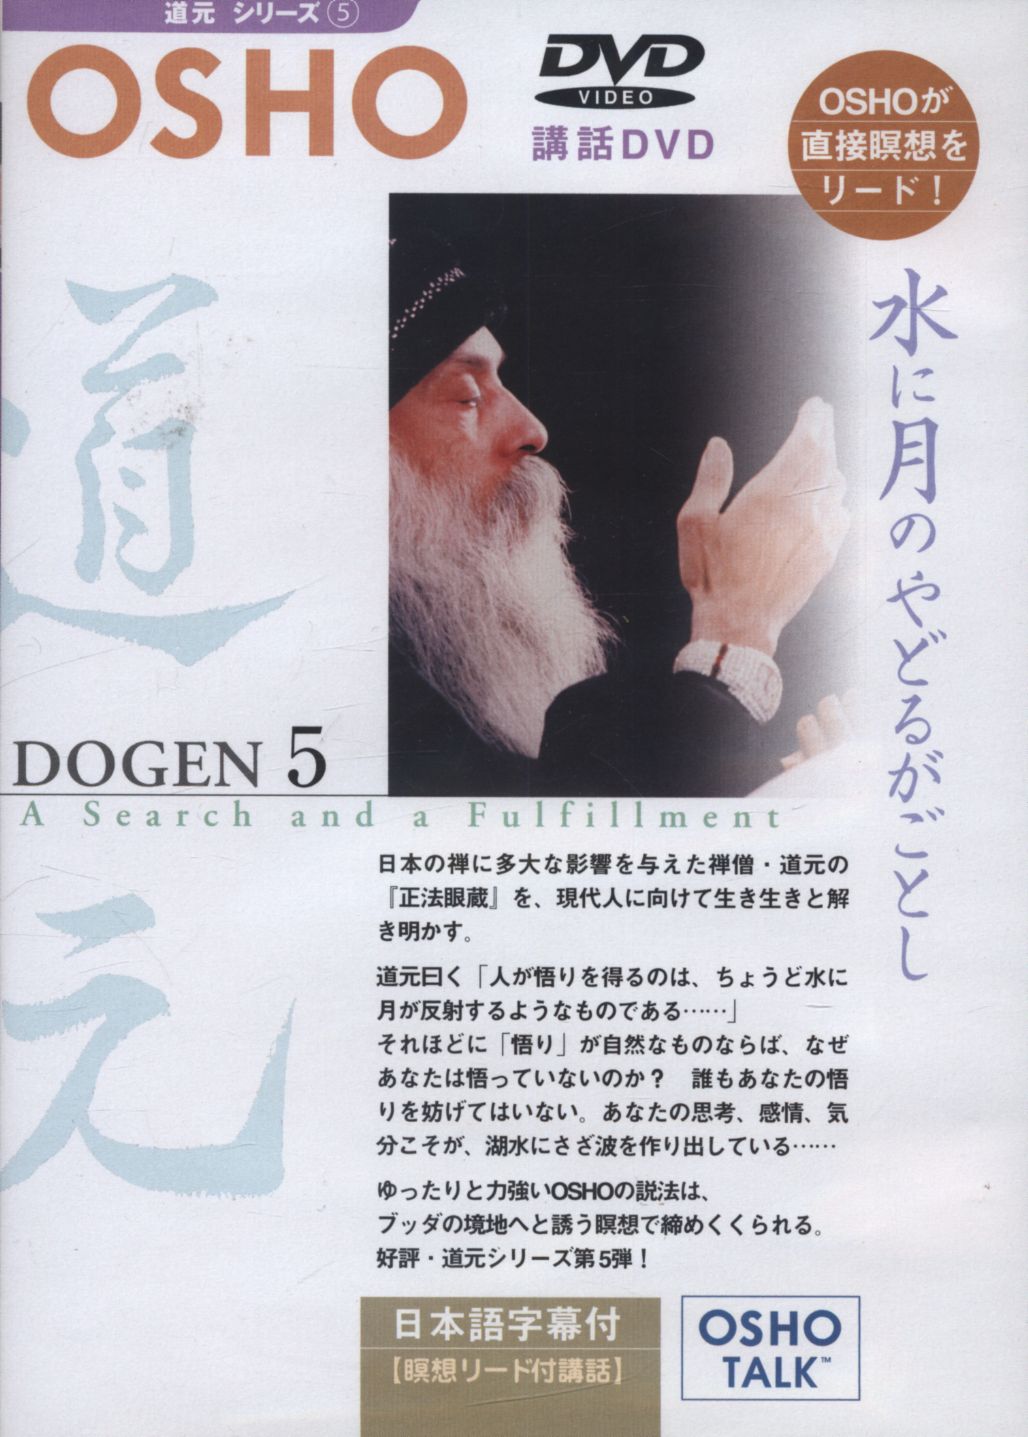 Lecture Dvd Dogen Series Button Activates But Dwells Month To 5 Osho Water Mandarake Online Shop